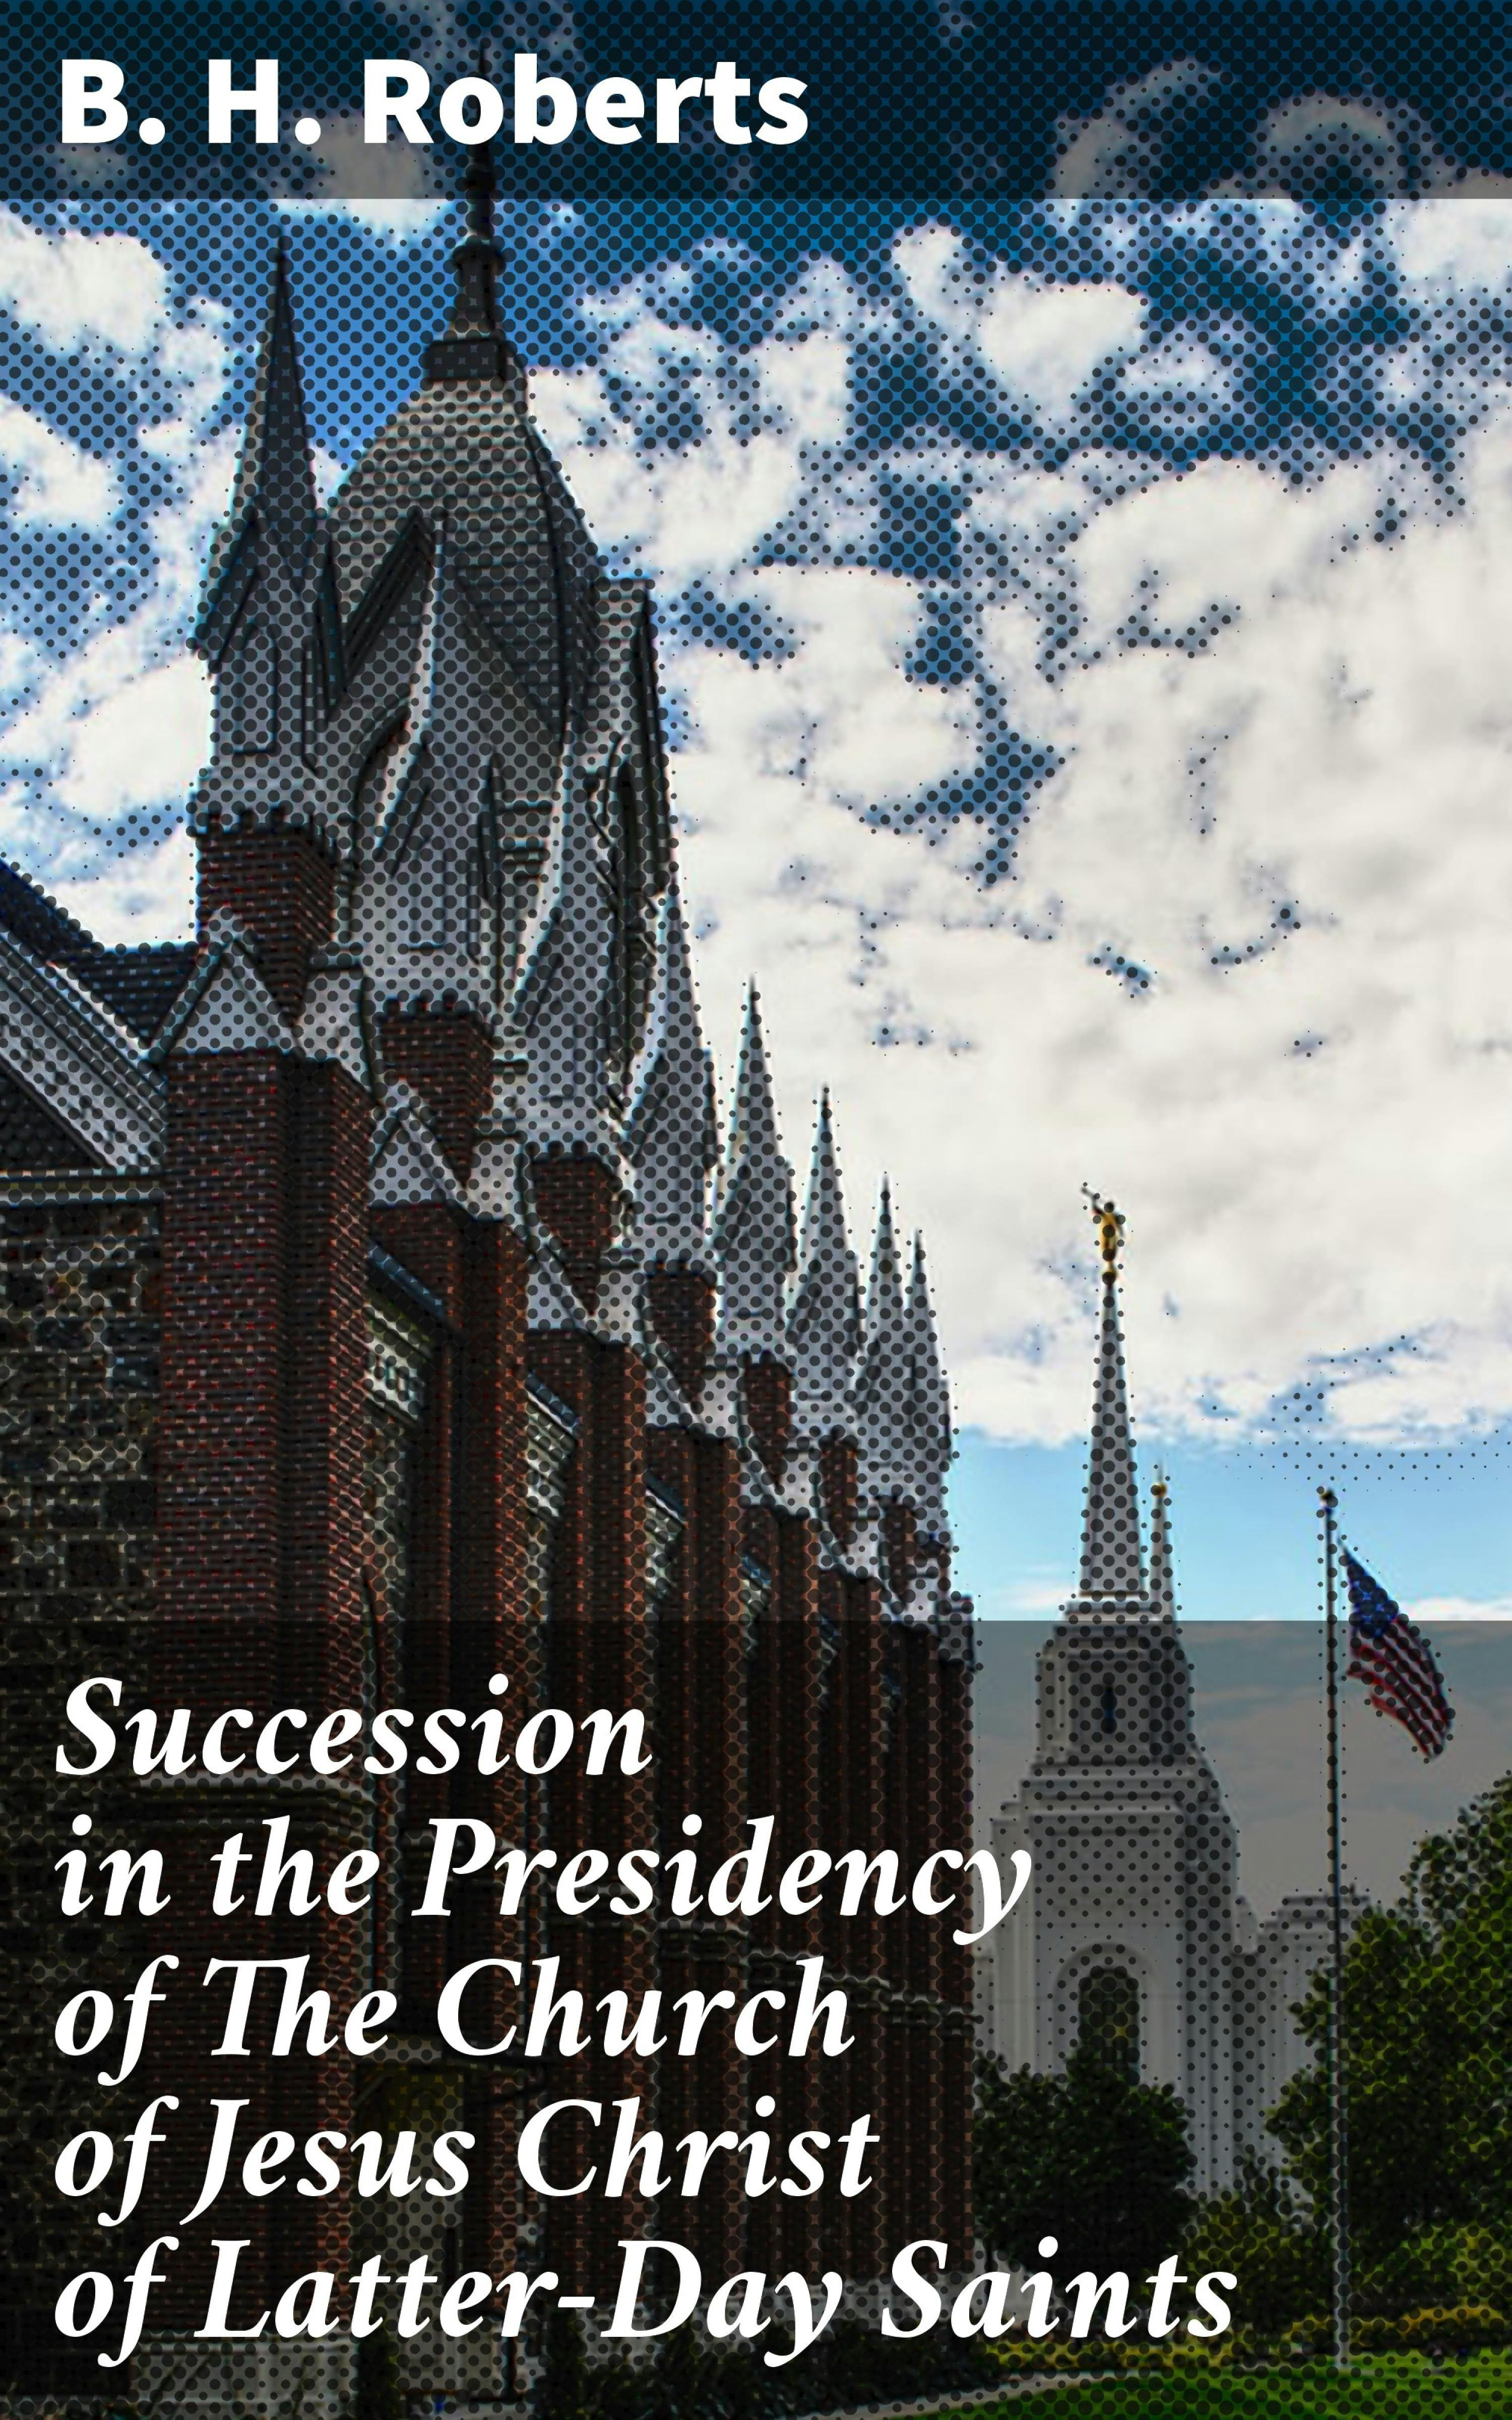 Succession in the Presidency of The Church of Jesus Christ of Latter-Day Saints - B. H. Roberts